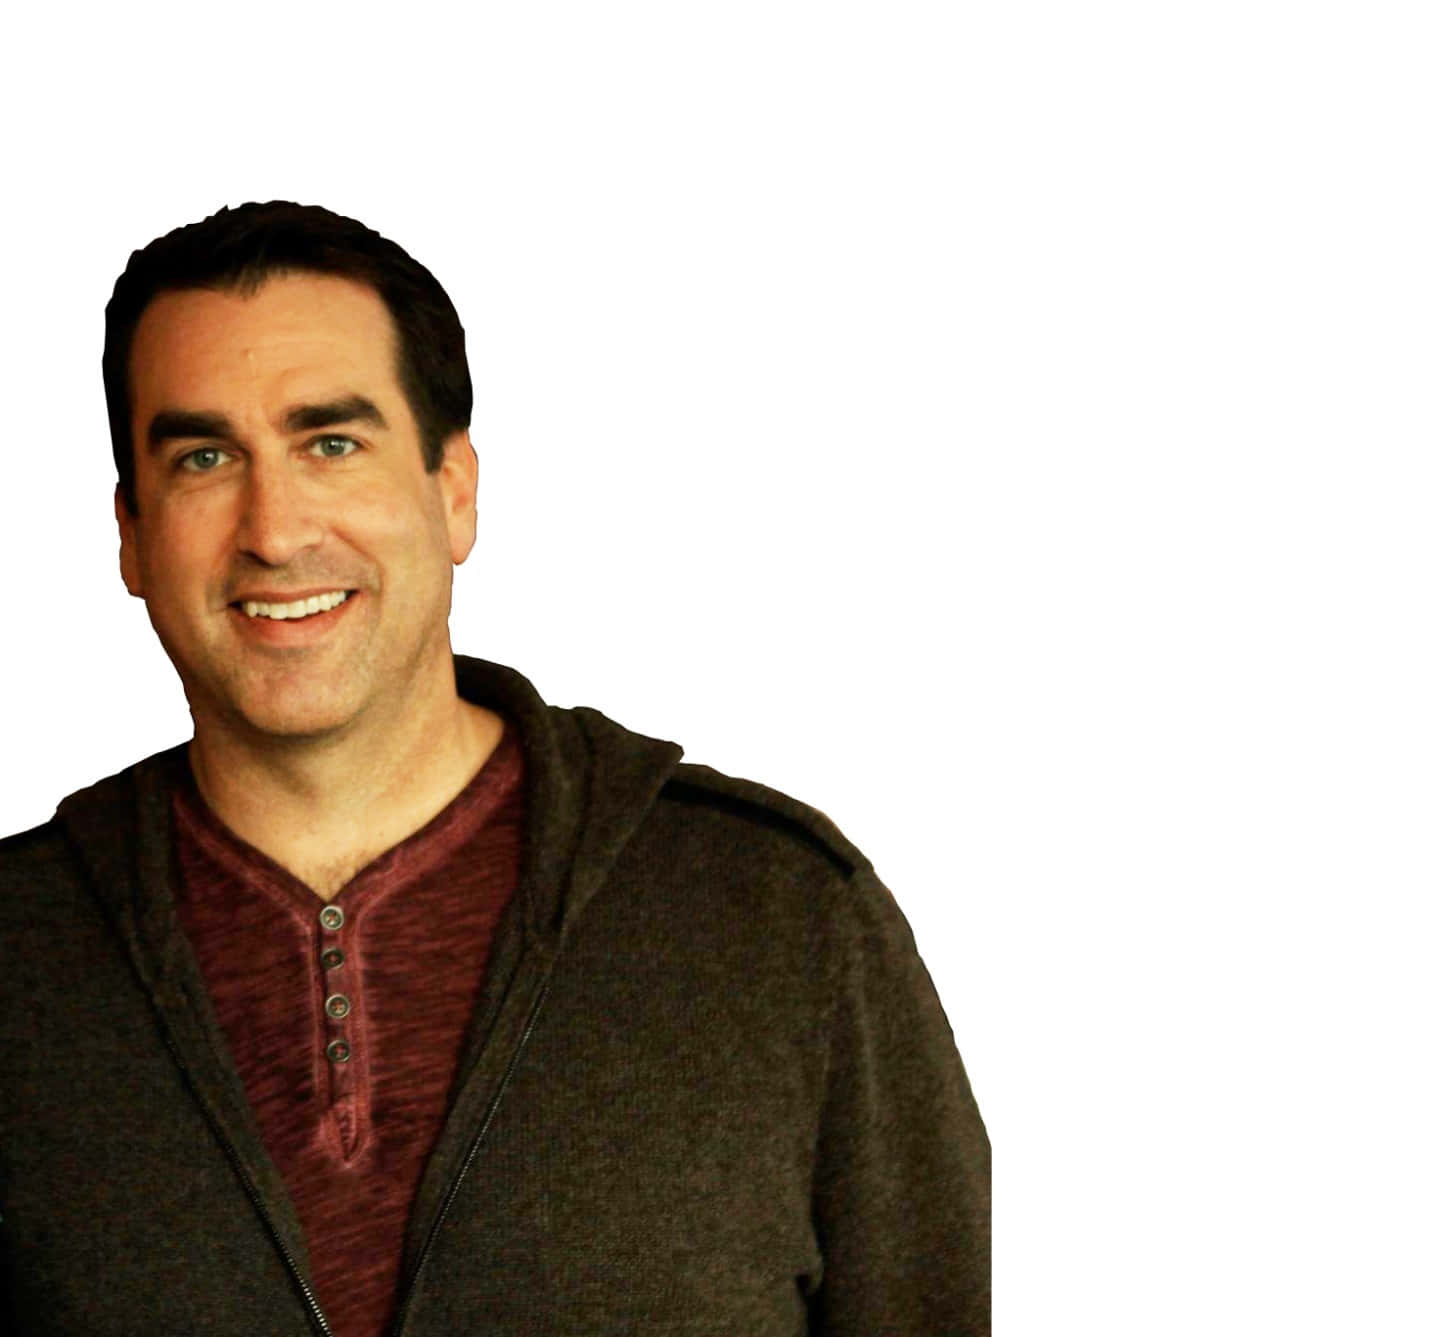 Comedian Rob Riggle on stage. Wallpaper